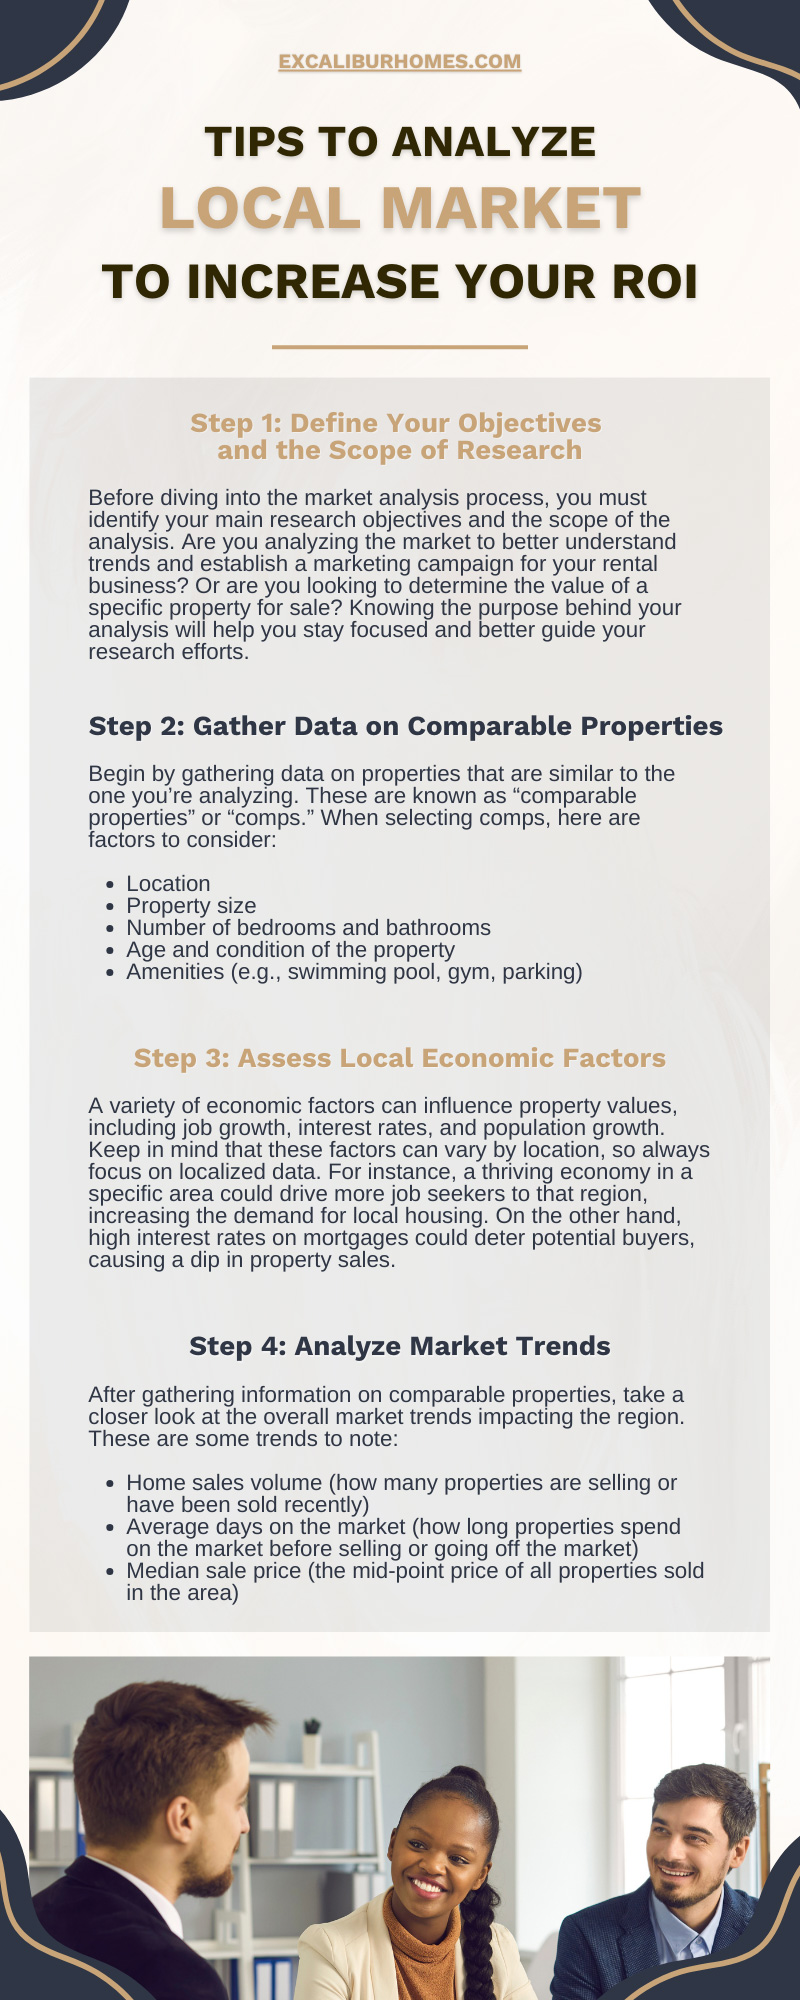 Tips To Analyze Your Local Market To Increase Your ROI 